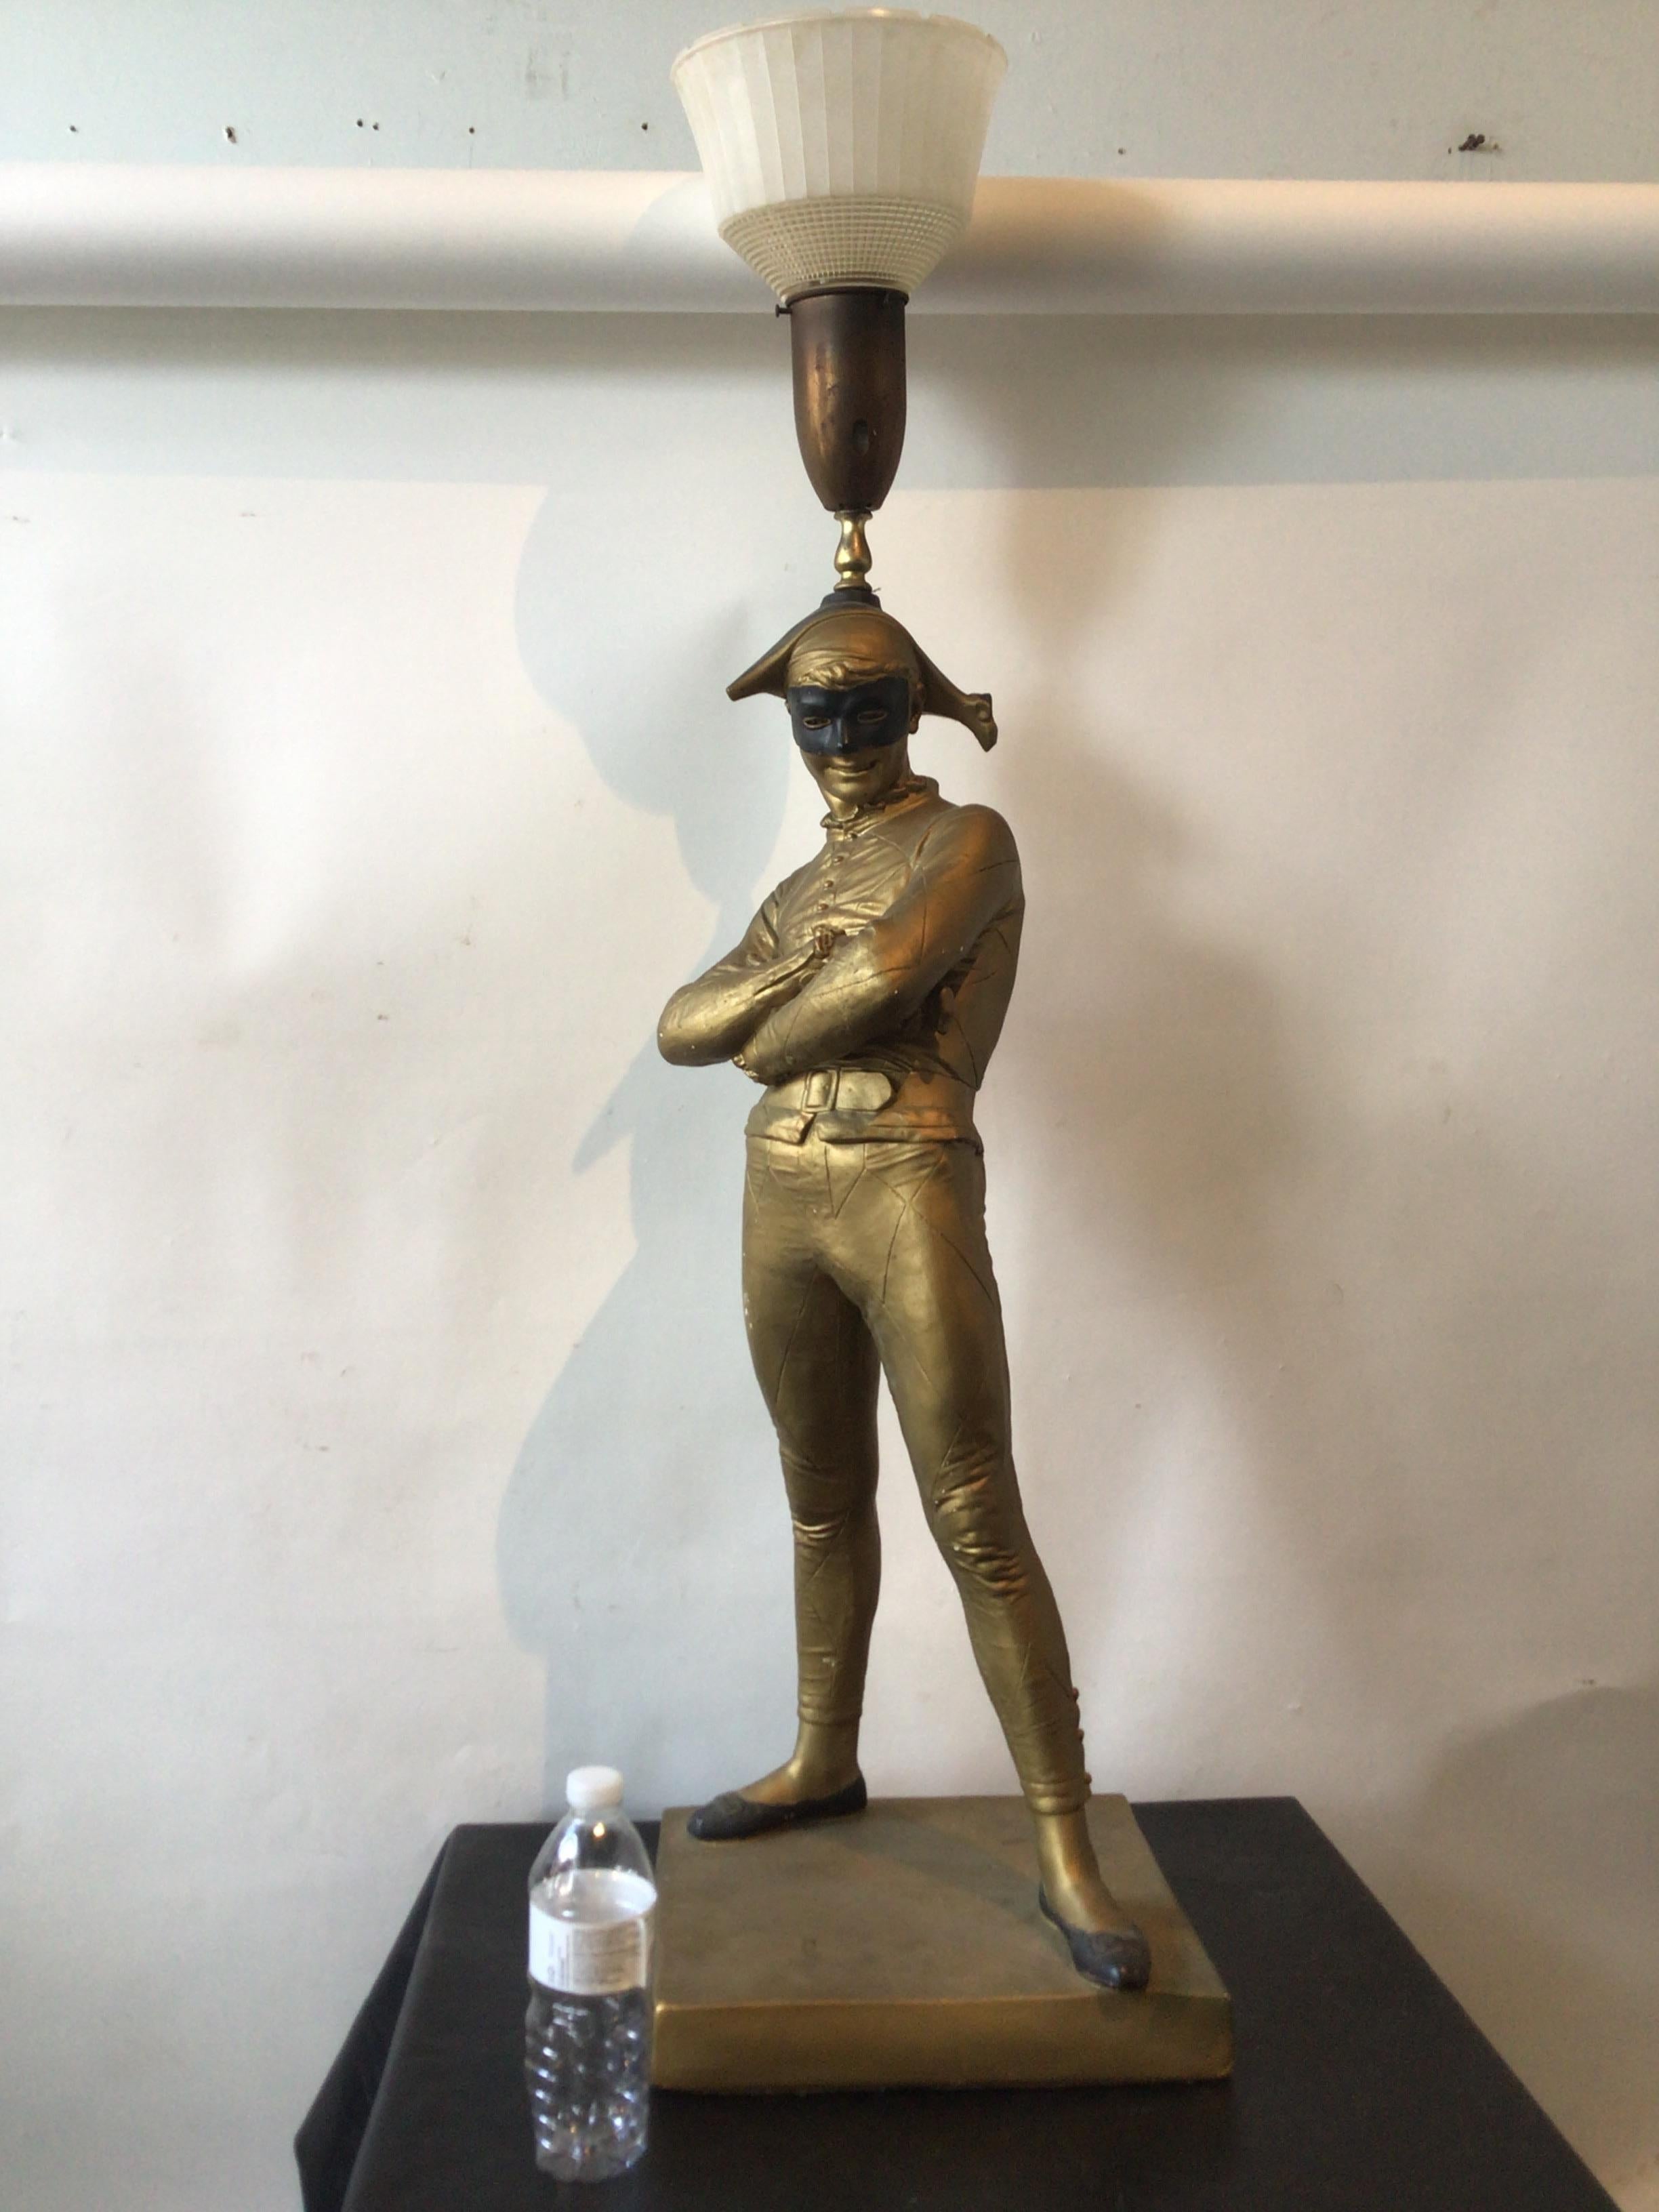 1950s Plaster harlequin lamp.
Harlequin is 34”, above the harlequins hat is another 12”. Lamp needs rewiring.